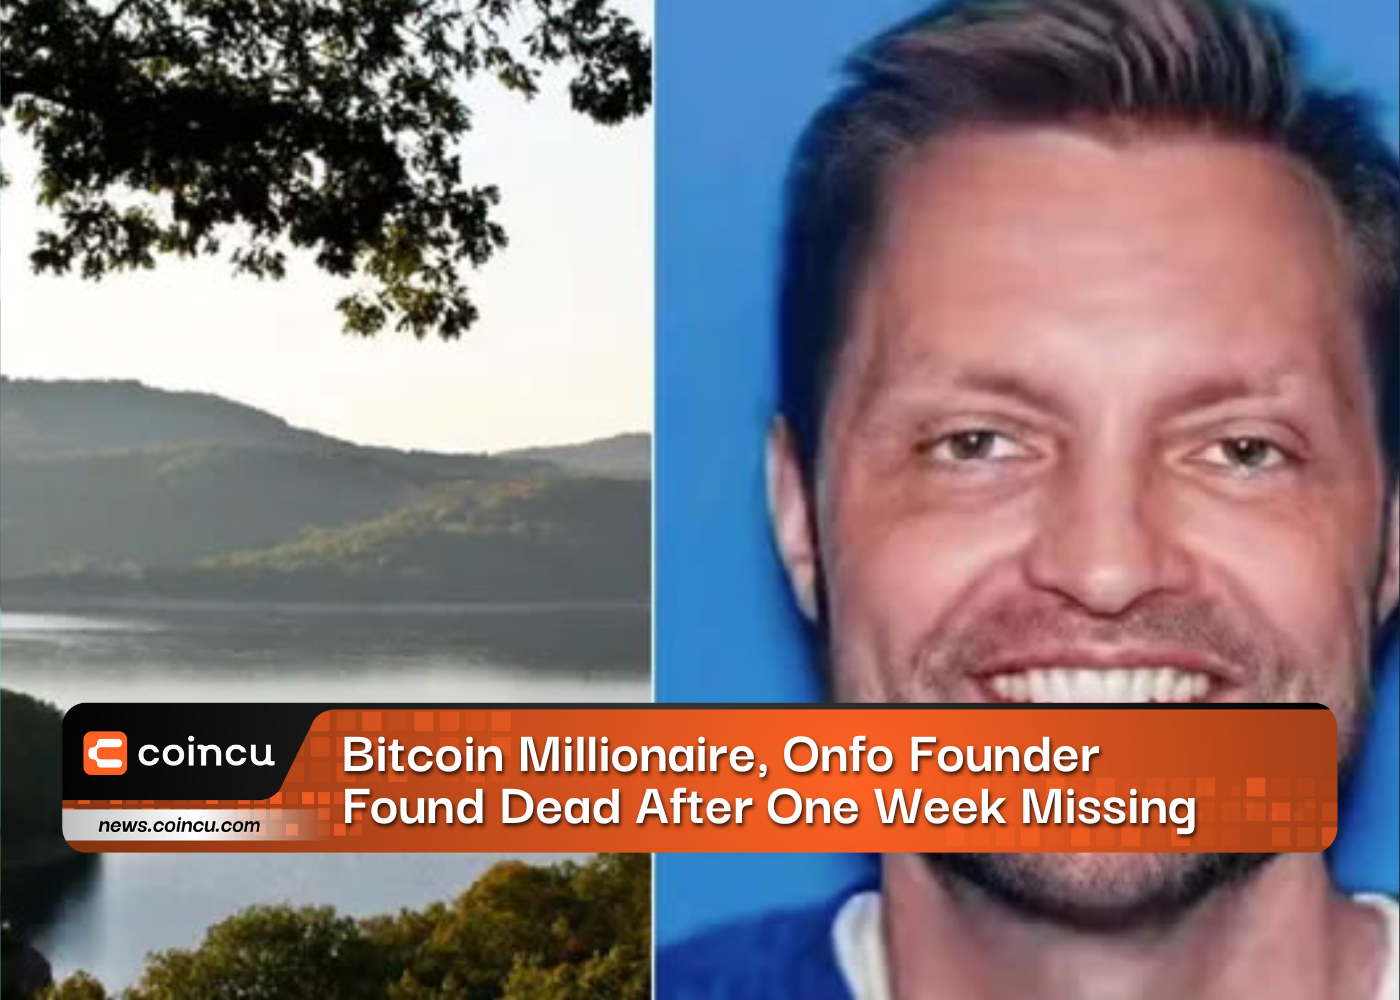 Bitcoin Millionaire, Onfo Founder Found Dead After One Week Missing